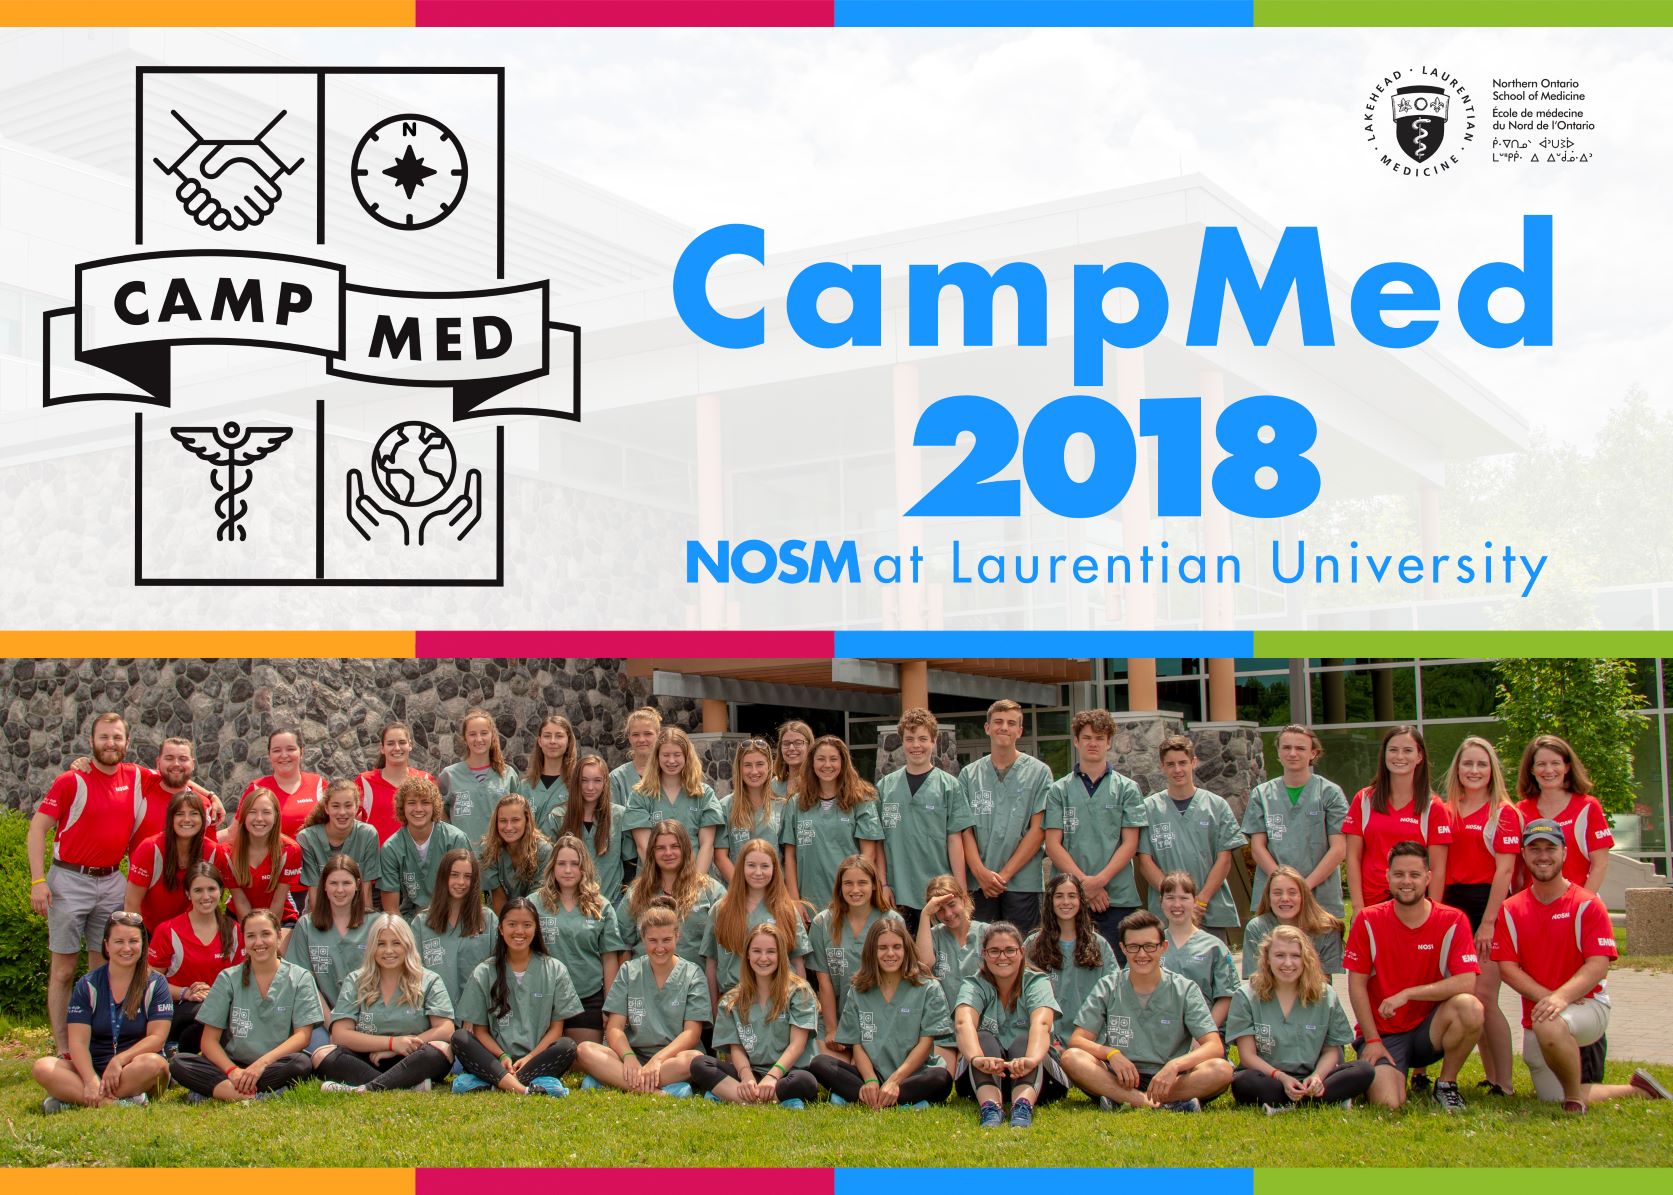 CampMed 2018 group photo of campers, team leads, and NOSM staff at Laurentian University